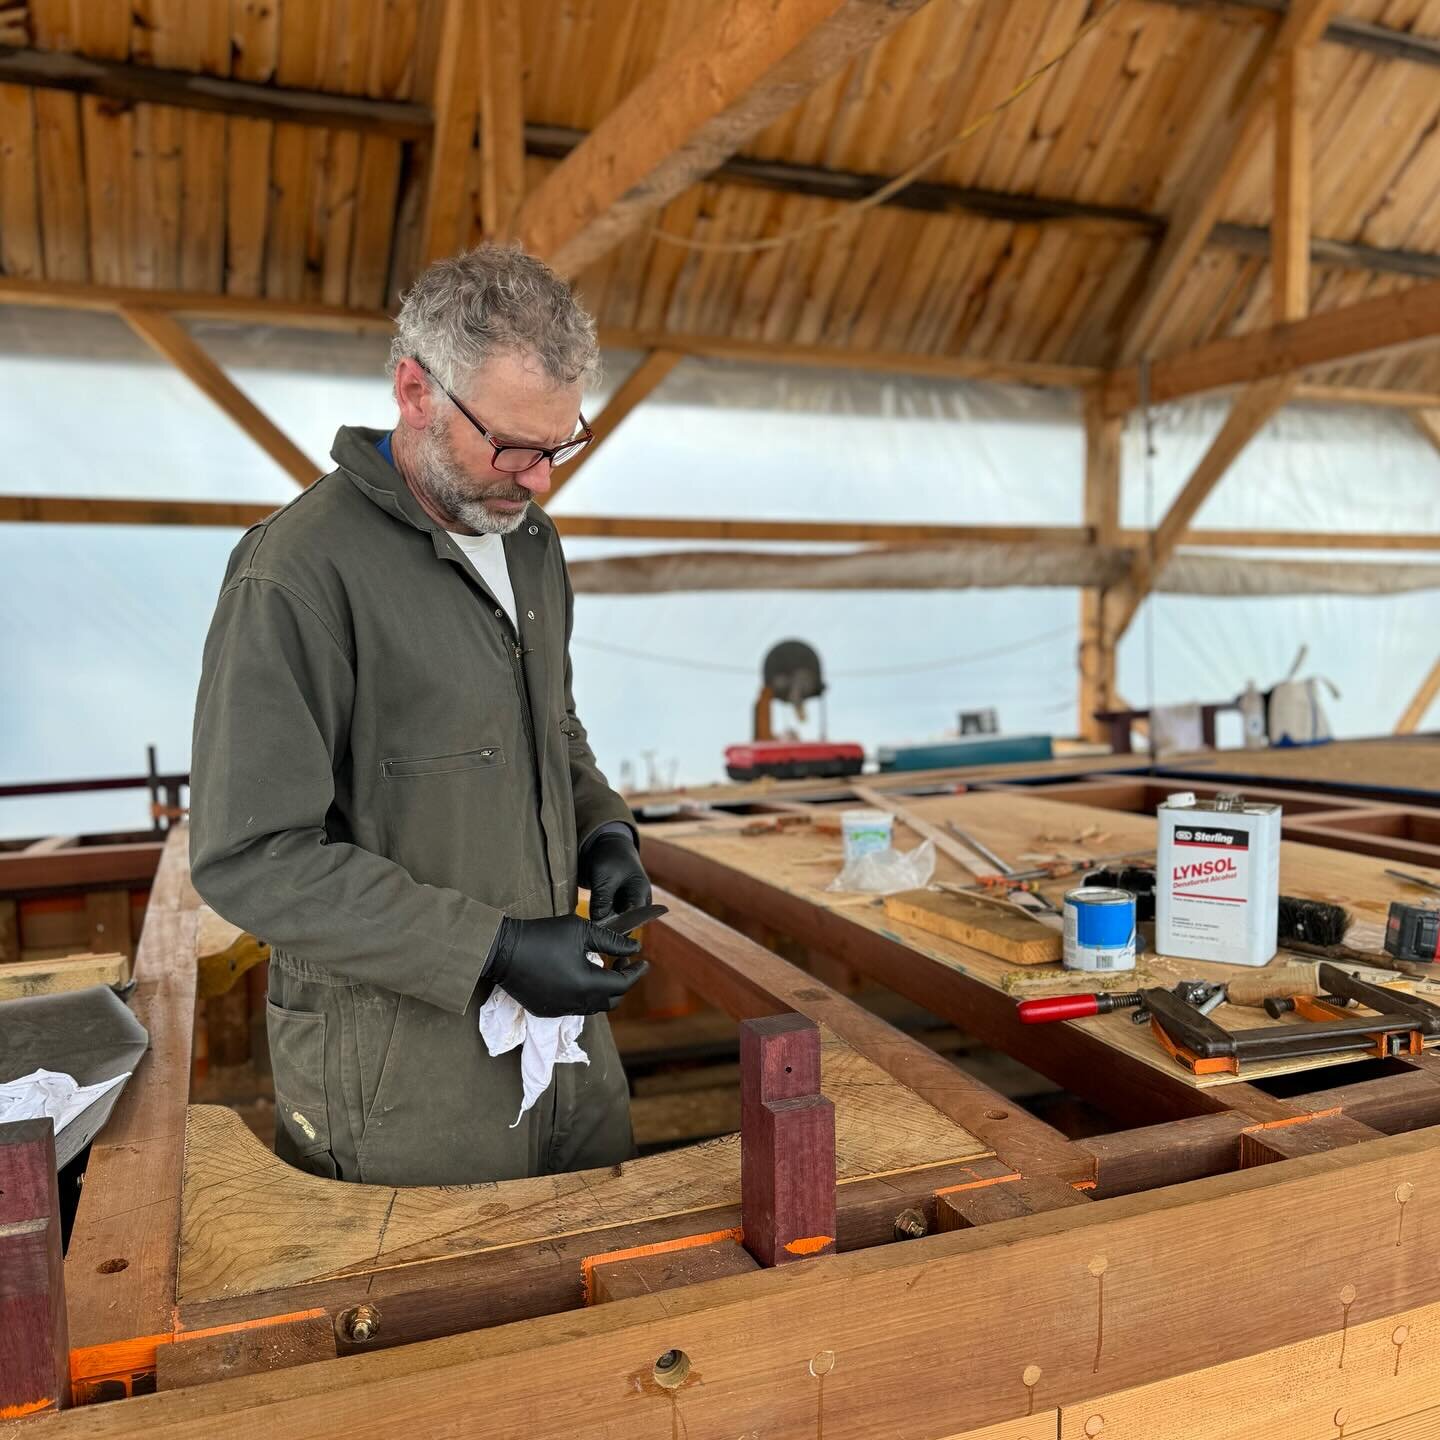 It&rsquo;s super exciting to watch the progress being made on the rebuild of the historic schooner Hindu in Thomaston.  The countdown is on for the splash date in June and the return back to Provincetown this summer.  You can help support the project